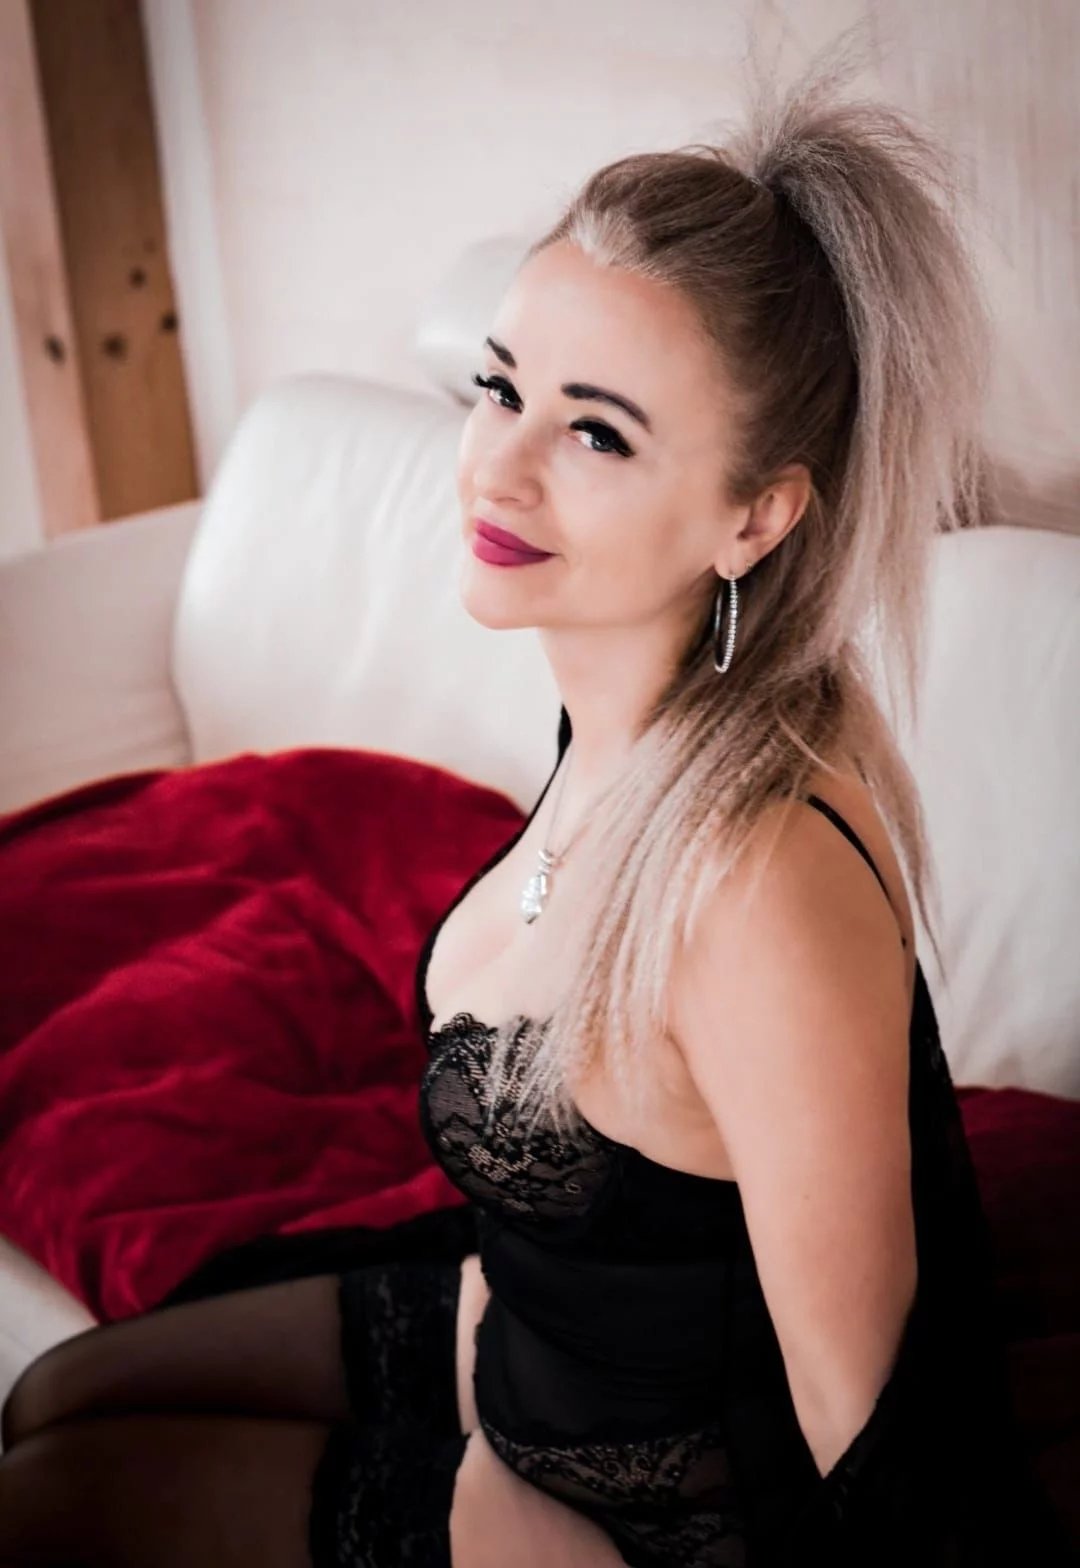 Find Escort Service in Güstrow and Enjoy Time With Pretty Girls - model photo Nika37